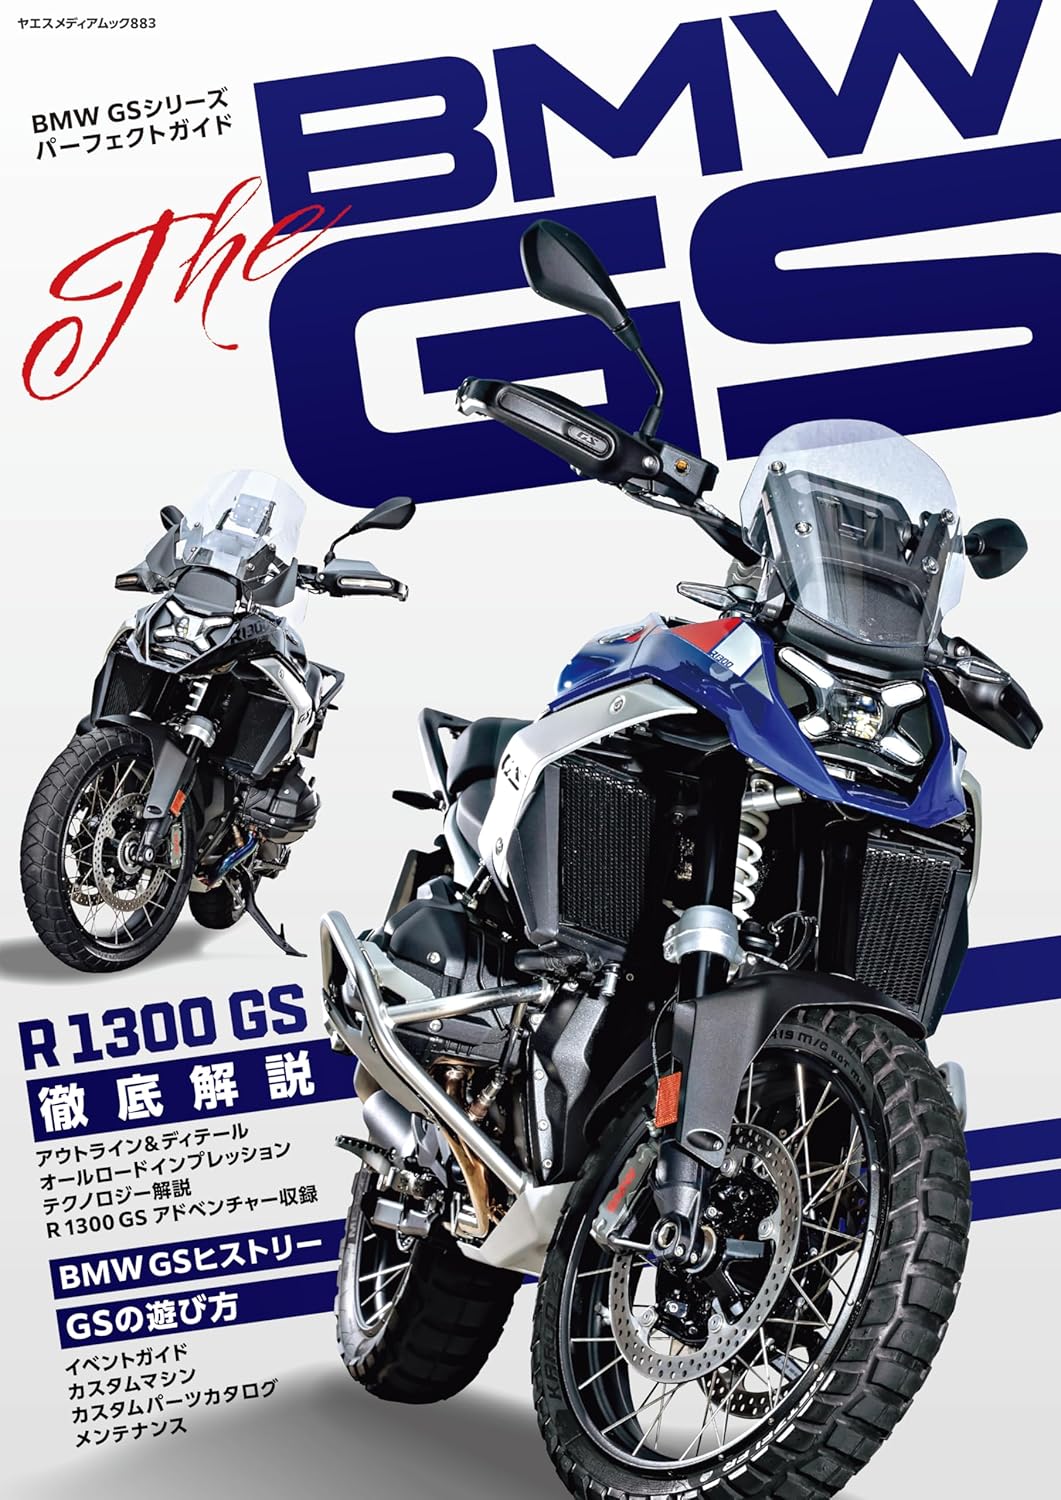 THE BMW GS Perfect Guide